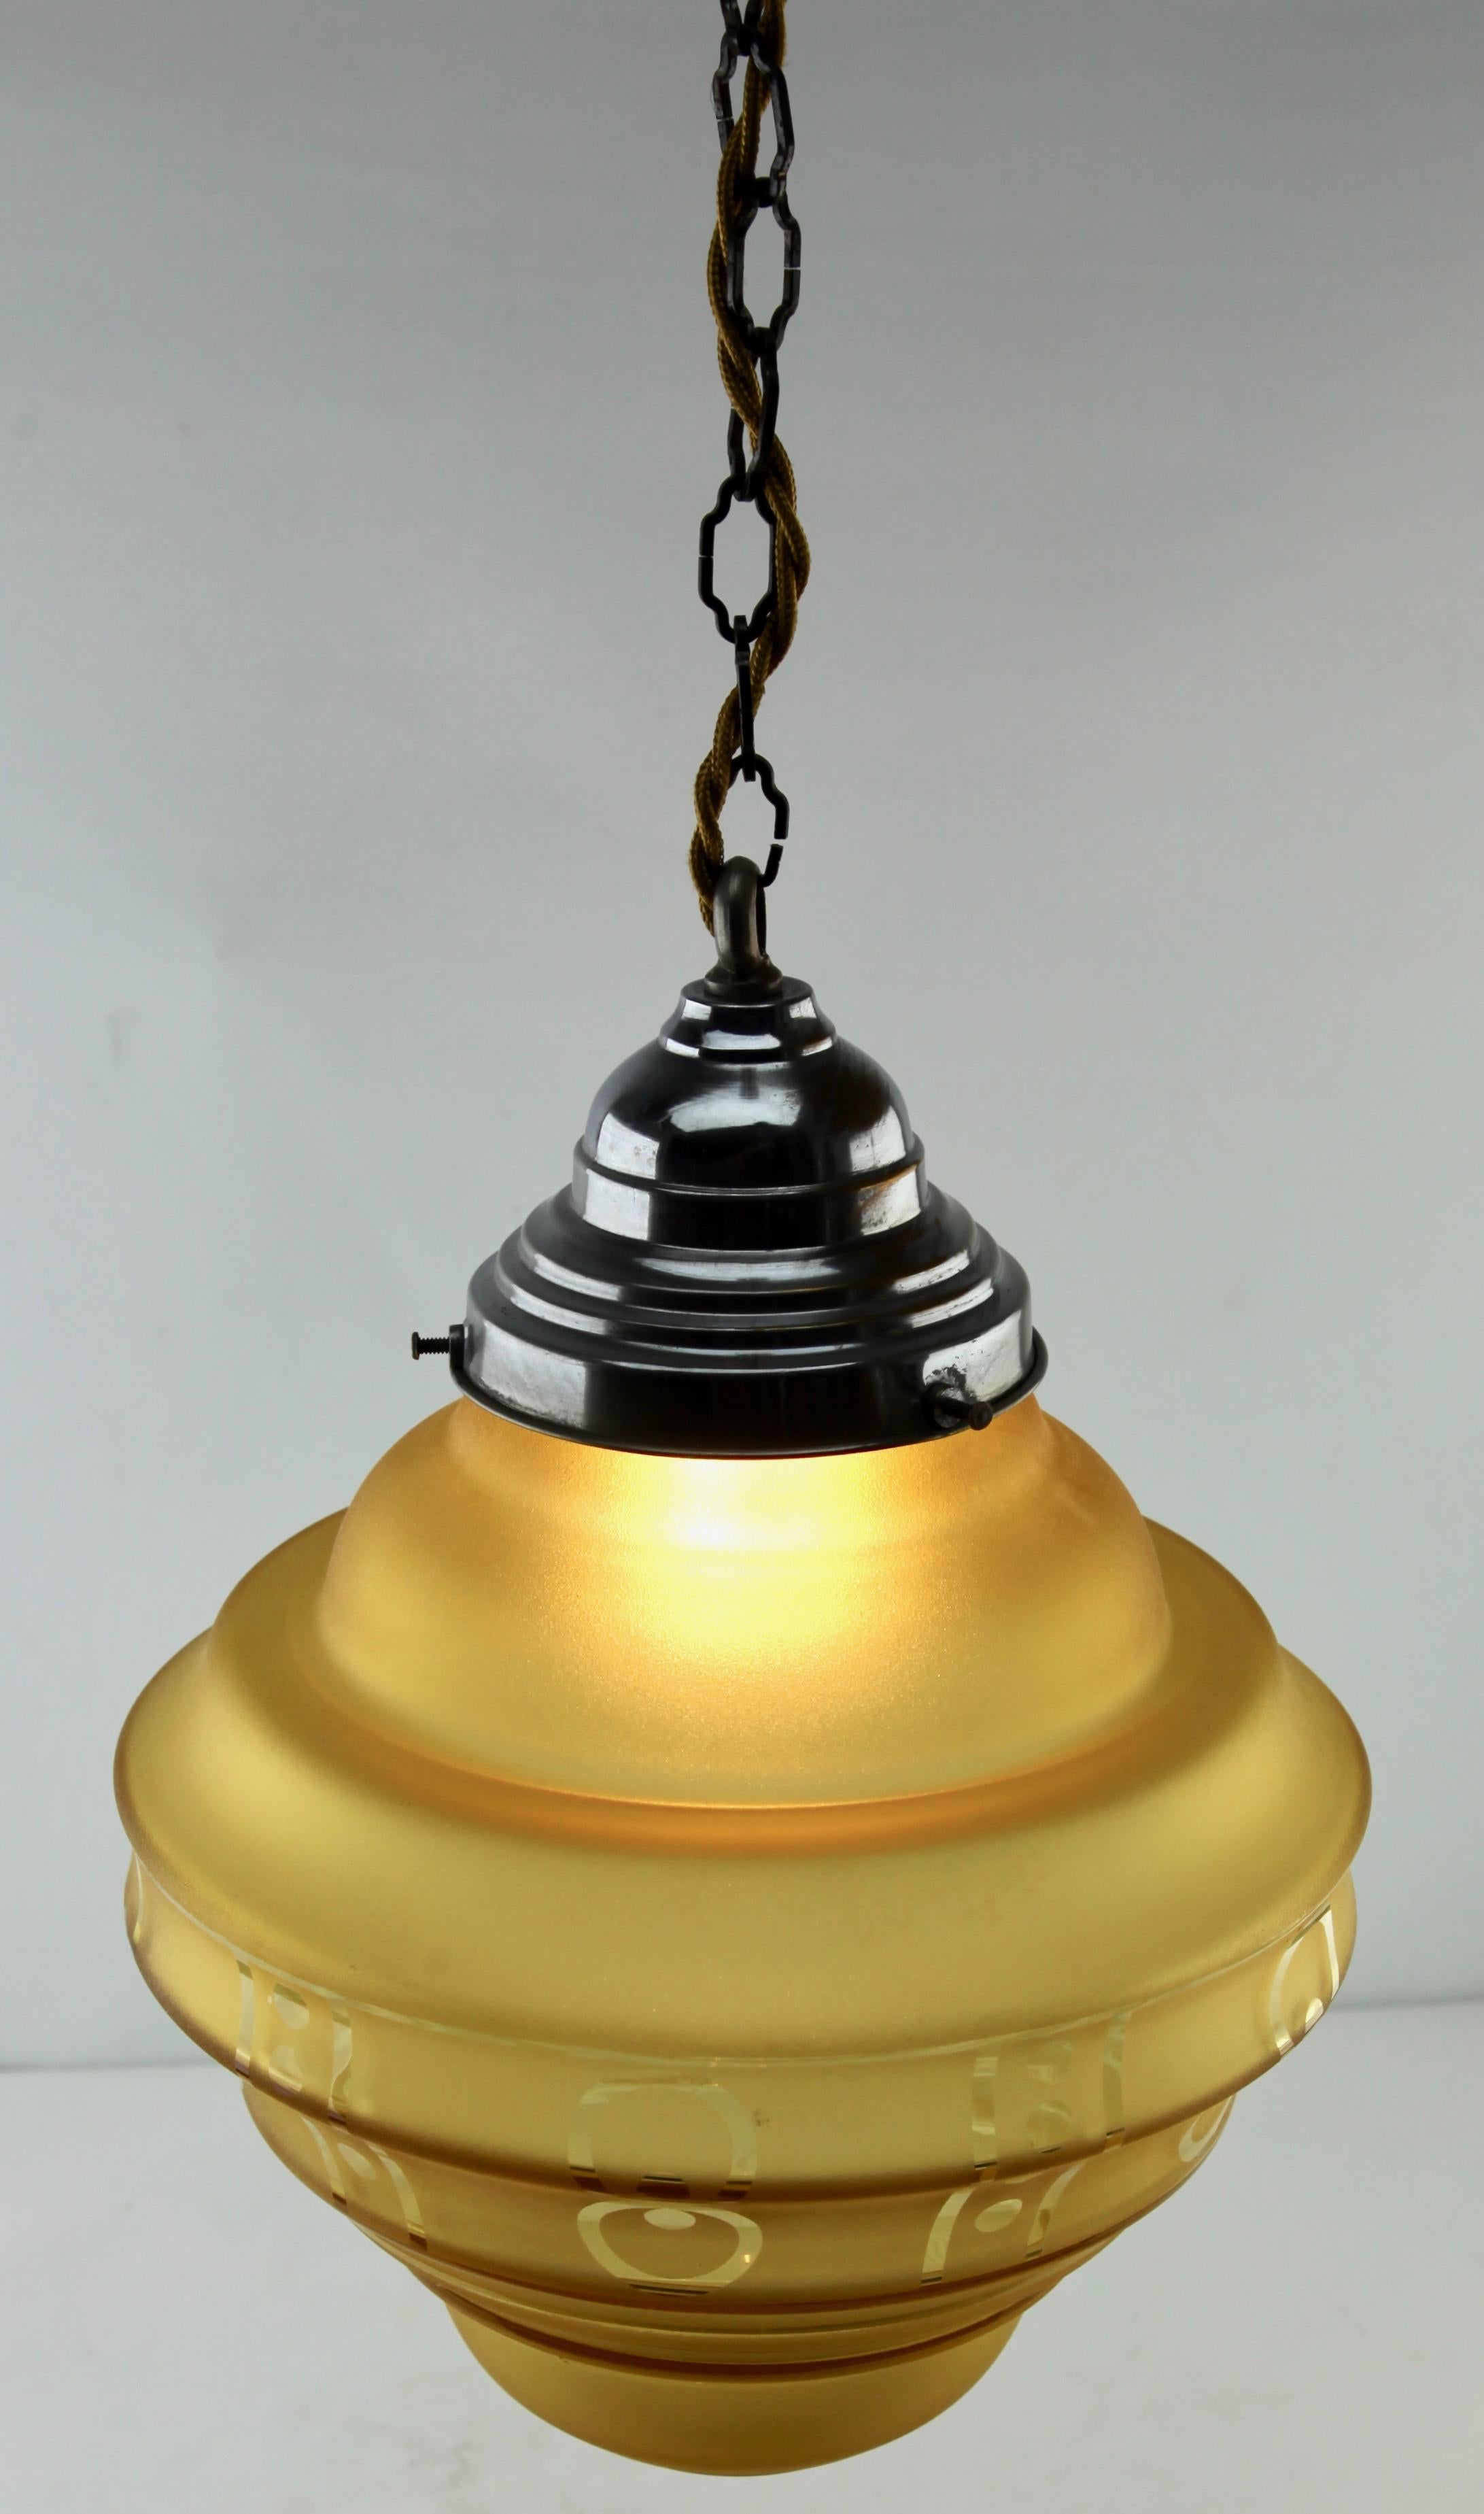 Hand-Crafted Art Deco Ceiling Lamp, Scailmont Belgium Glass Shade, 1930s For Sale